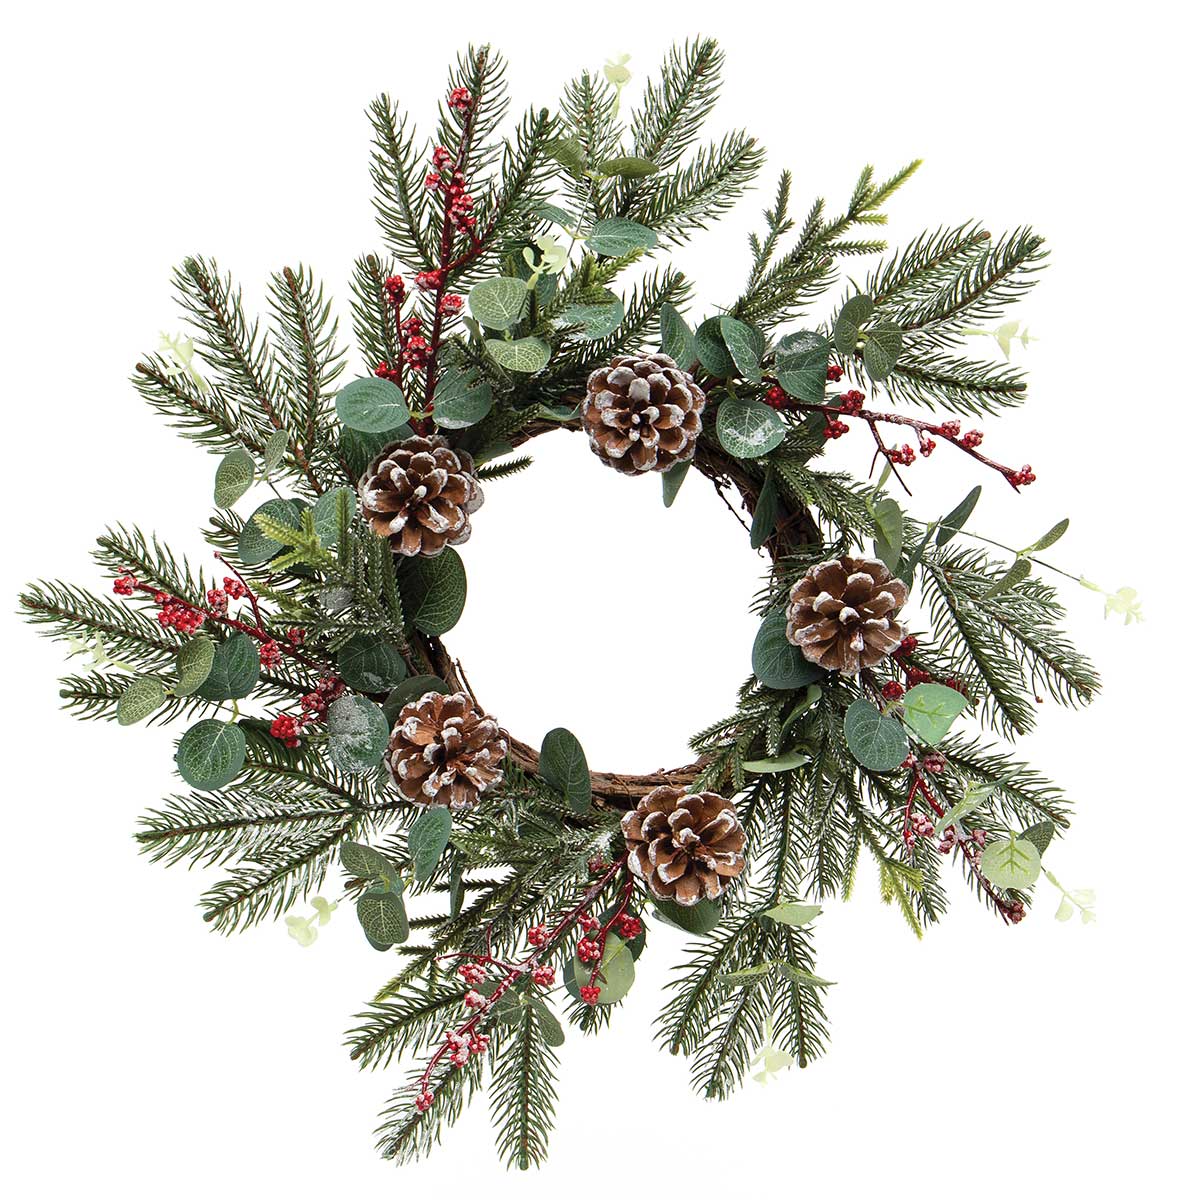 !HOLIDAY BERRY WREATH WITH RED BERRIES, PINE, EUCALYPTUS v22